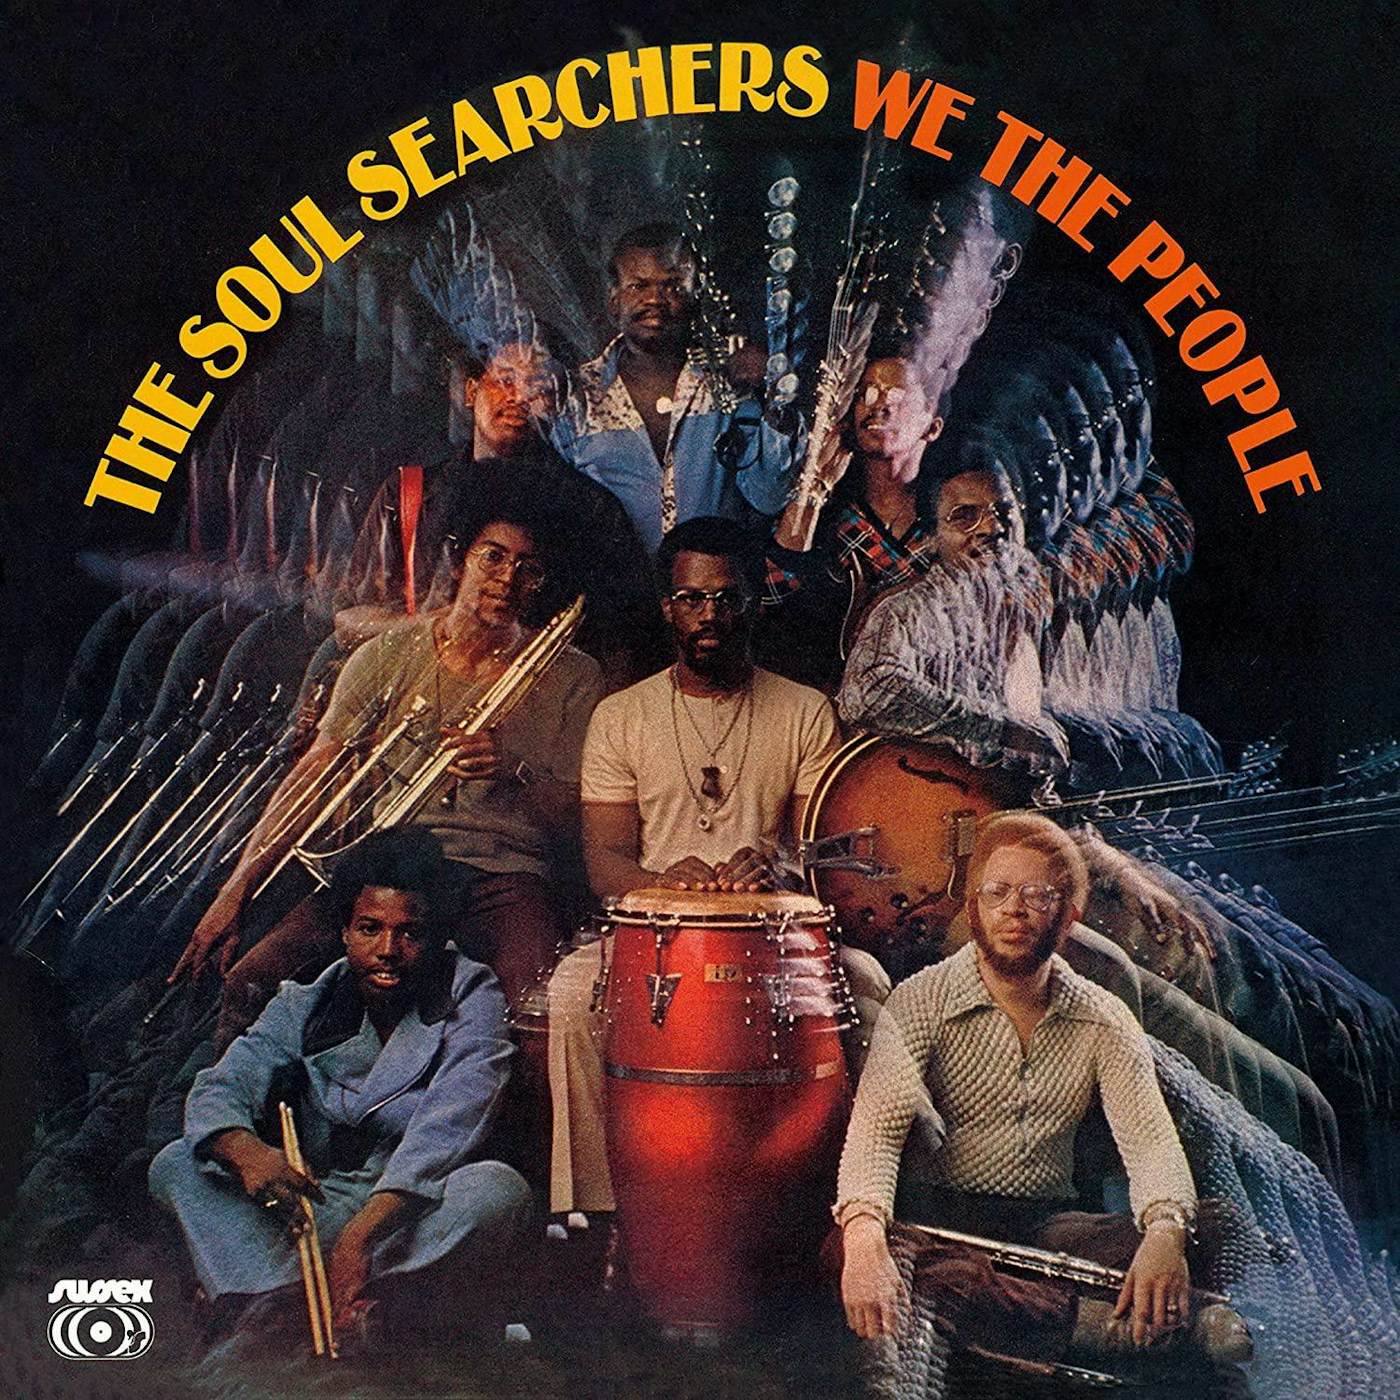 The Soul Searchers WE THE PEOPLE + 2 CD